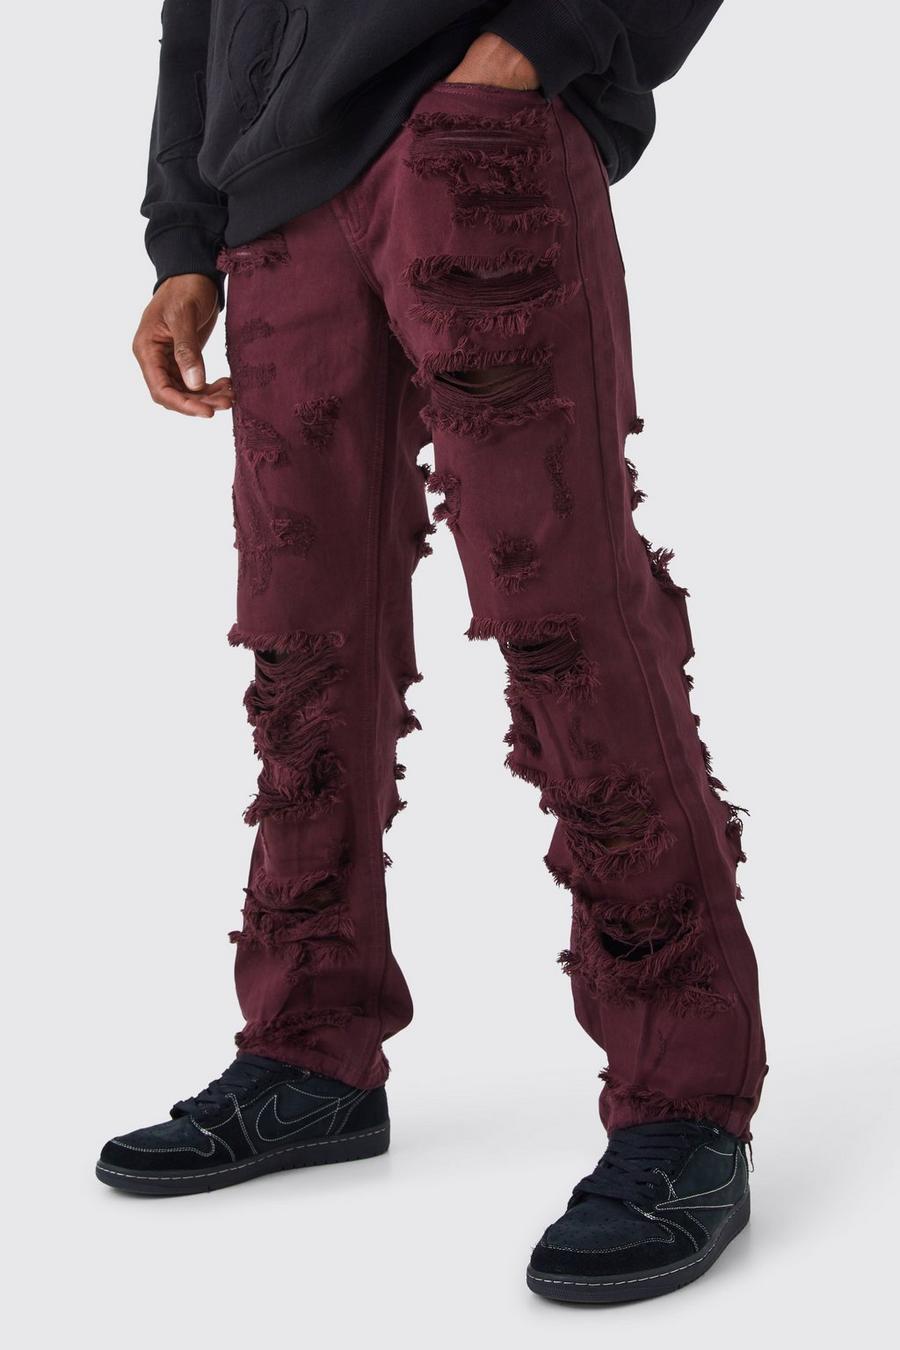 Burgundy red Relaxed Rigid Extreme Ripped Jean